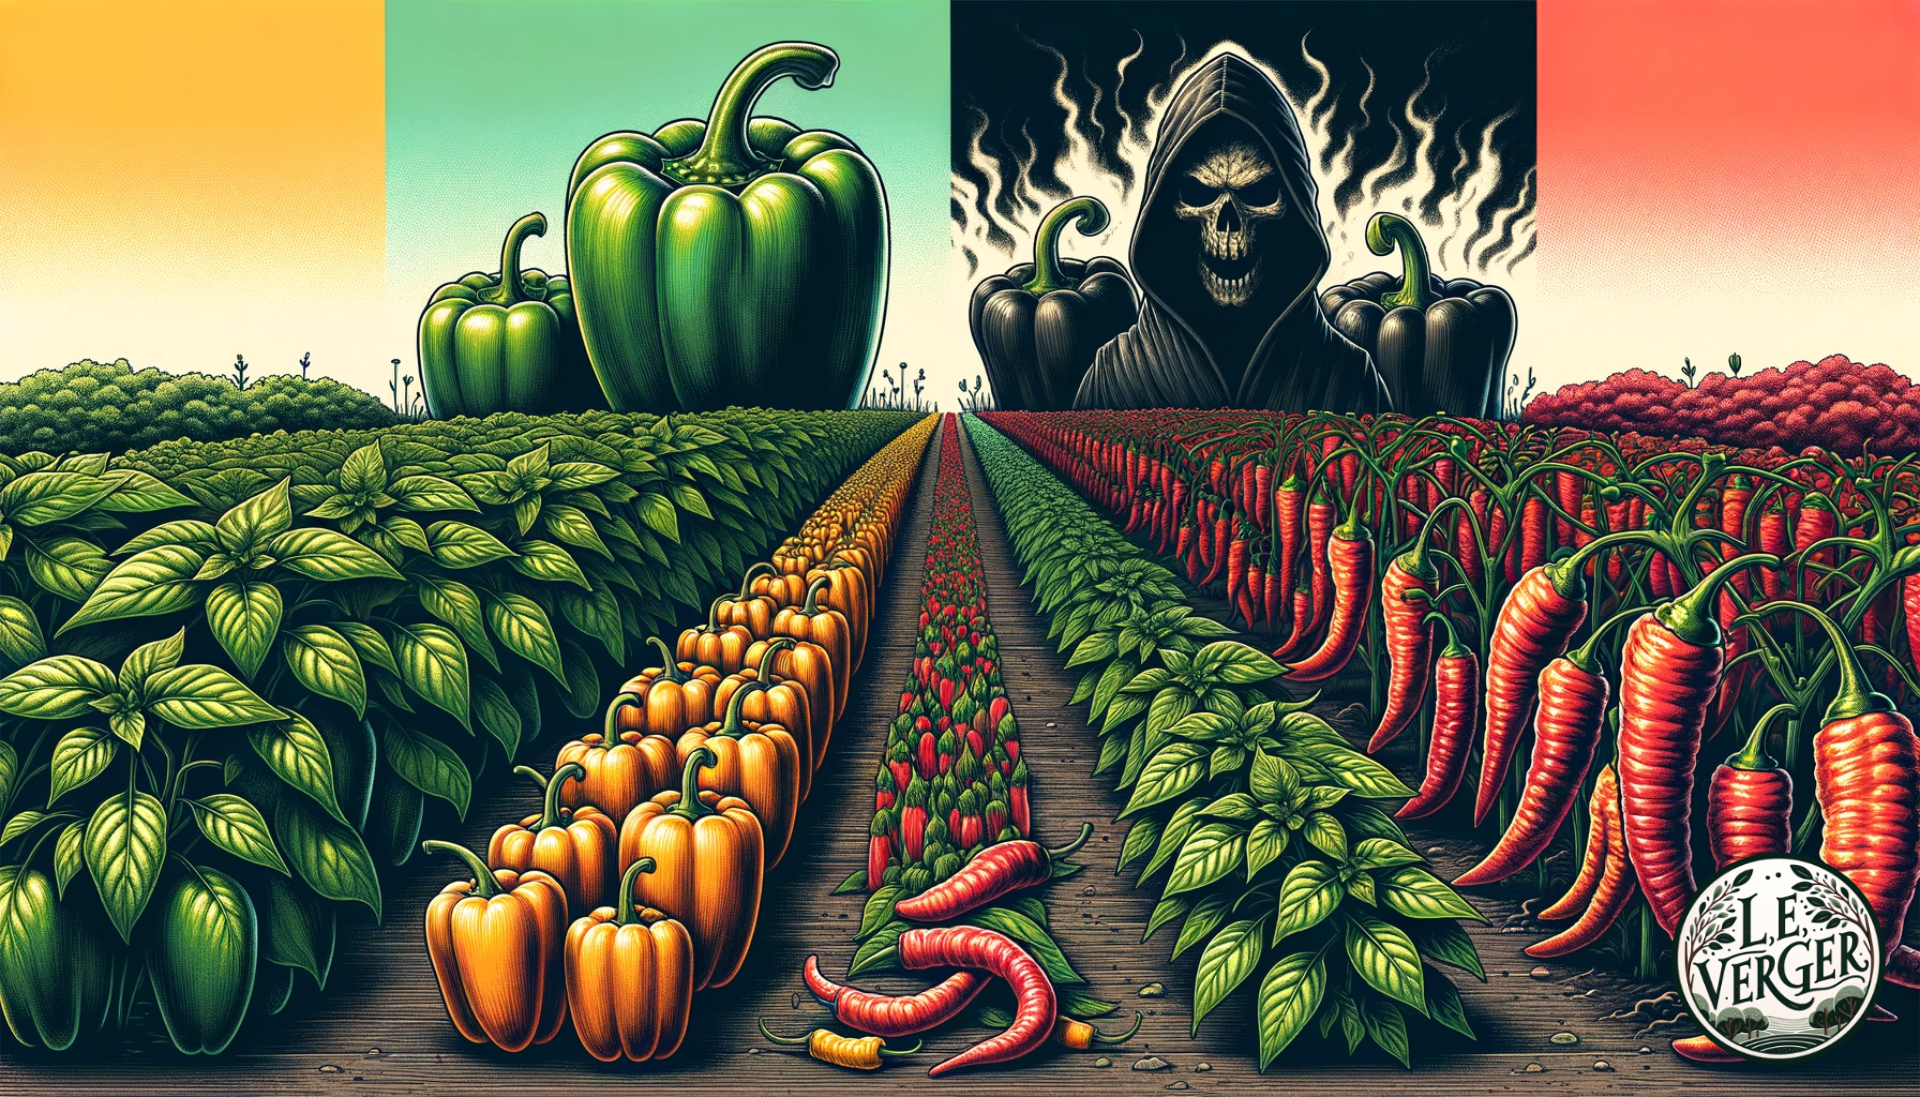 Wide illustration of a garden scene divided into sections, each showcasing a different type of pepper. The far left features bell peppers in green and red shades, standing tall and robust. Moving towards the right, there are smaller peppers in yellow and orange shades. The far right end showcases the Carolina Reaper with a dark, ominous aura and a hint of smoke rising, symbolising its extreme heat.